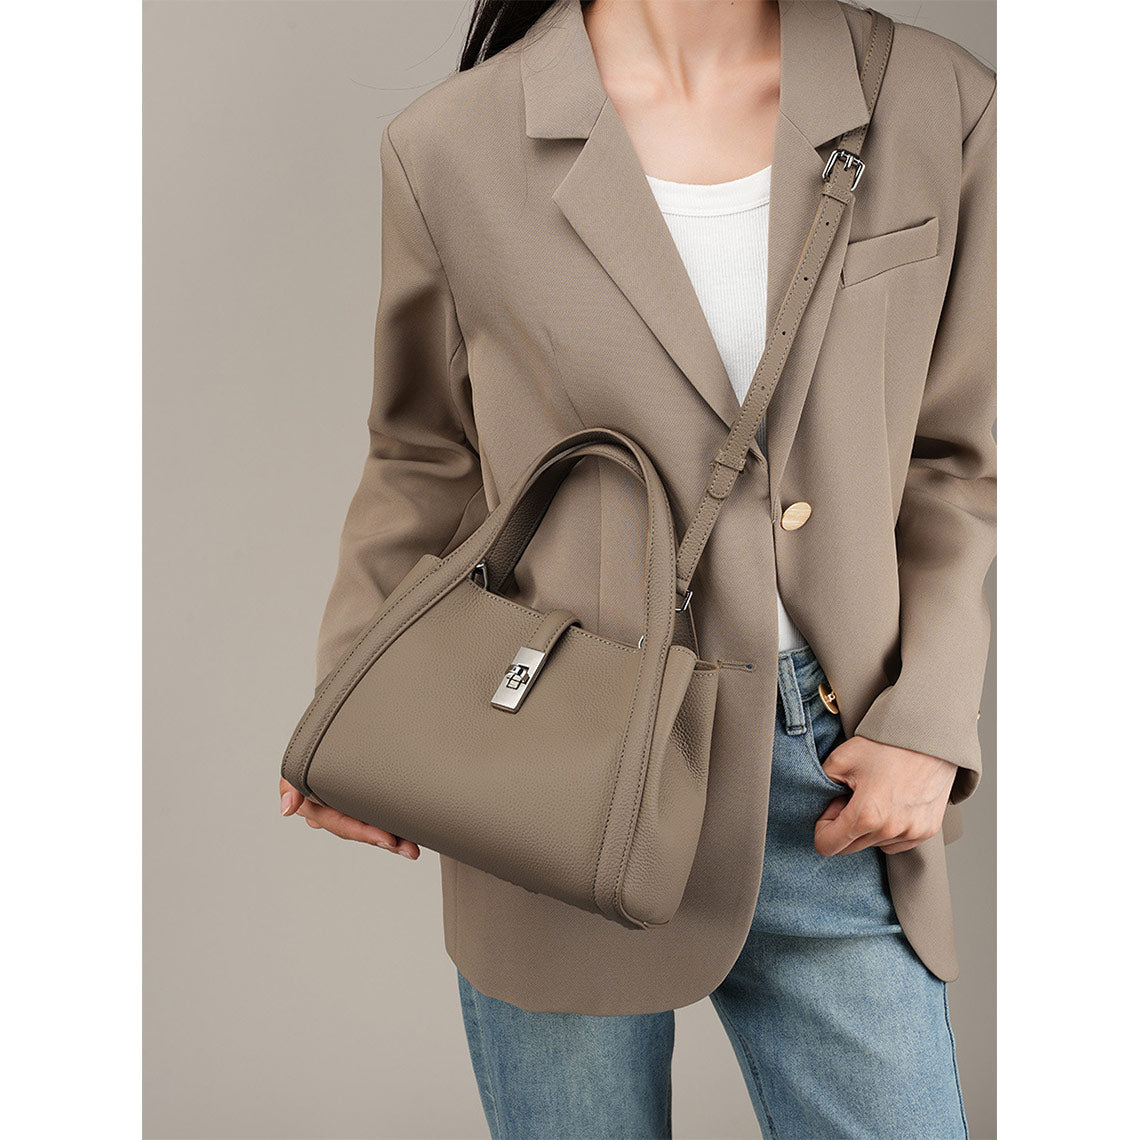 Taupe Leather Handbag Crossbody Bag for Women - POPSEWING®